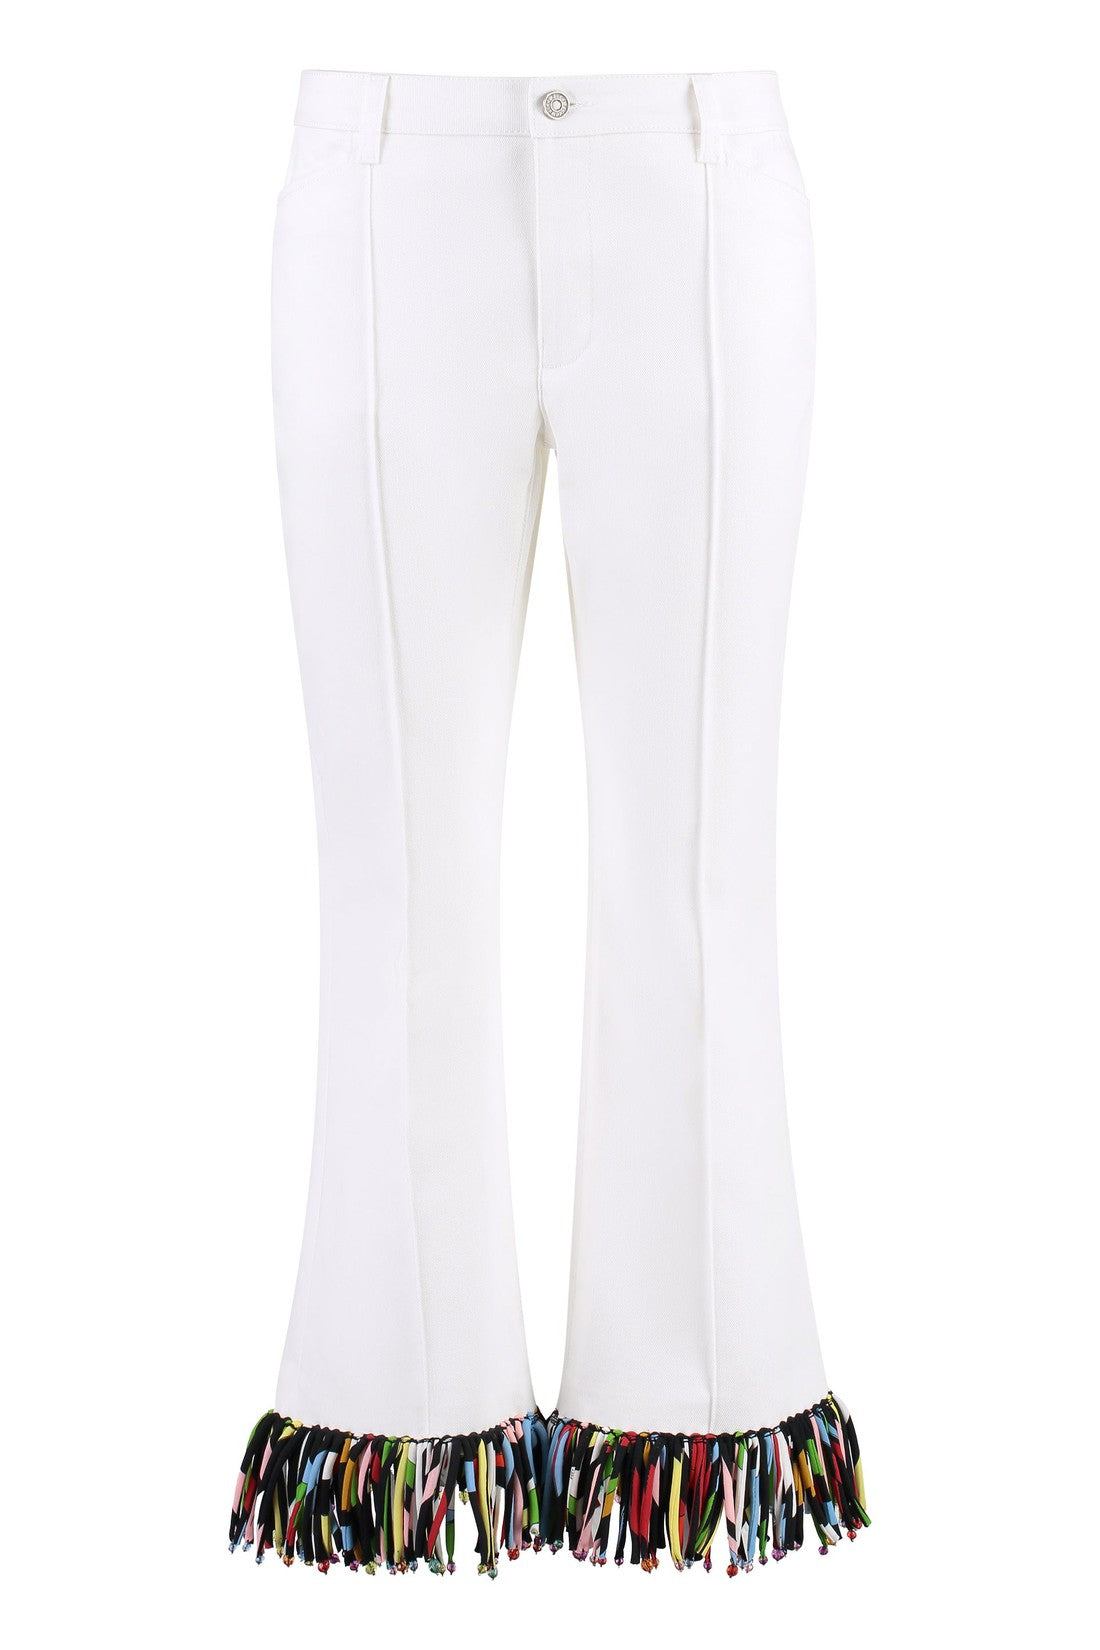 Emilio Pucci-OUTLET-SALE-Cropped flared trousers-ARCHIVIST